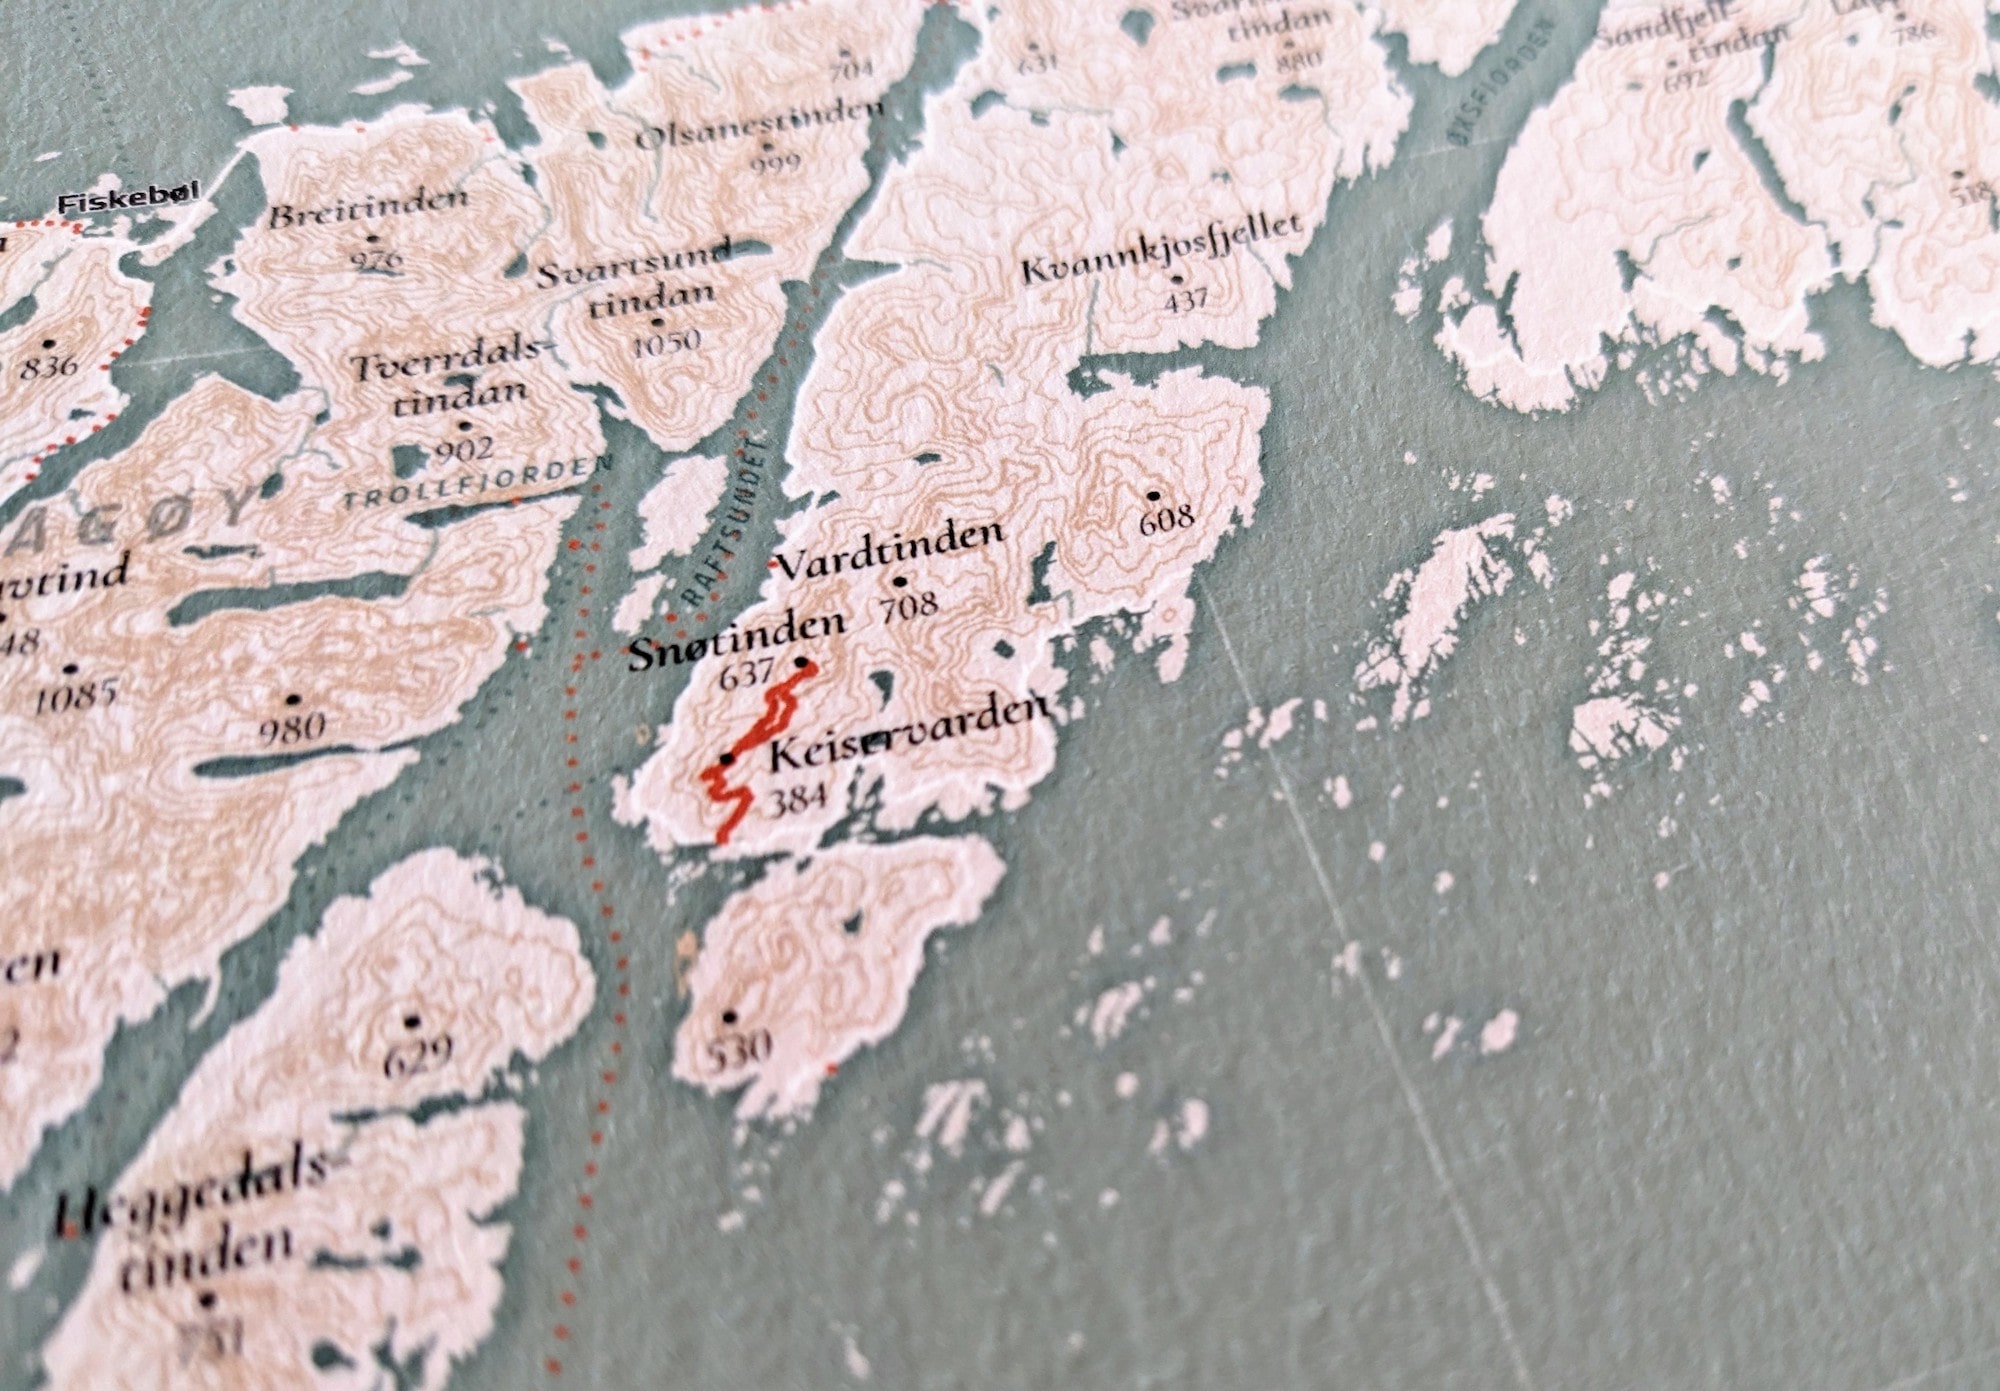 A close-up photo of the printed map